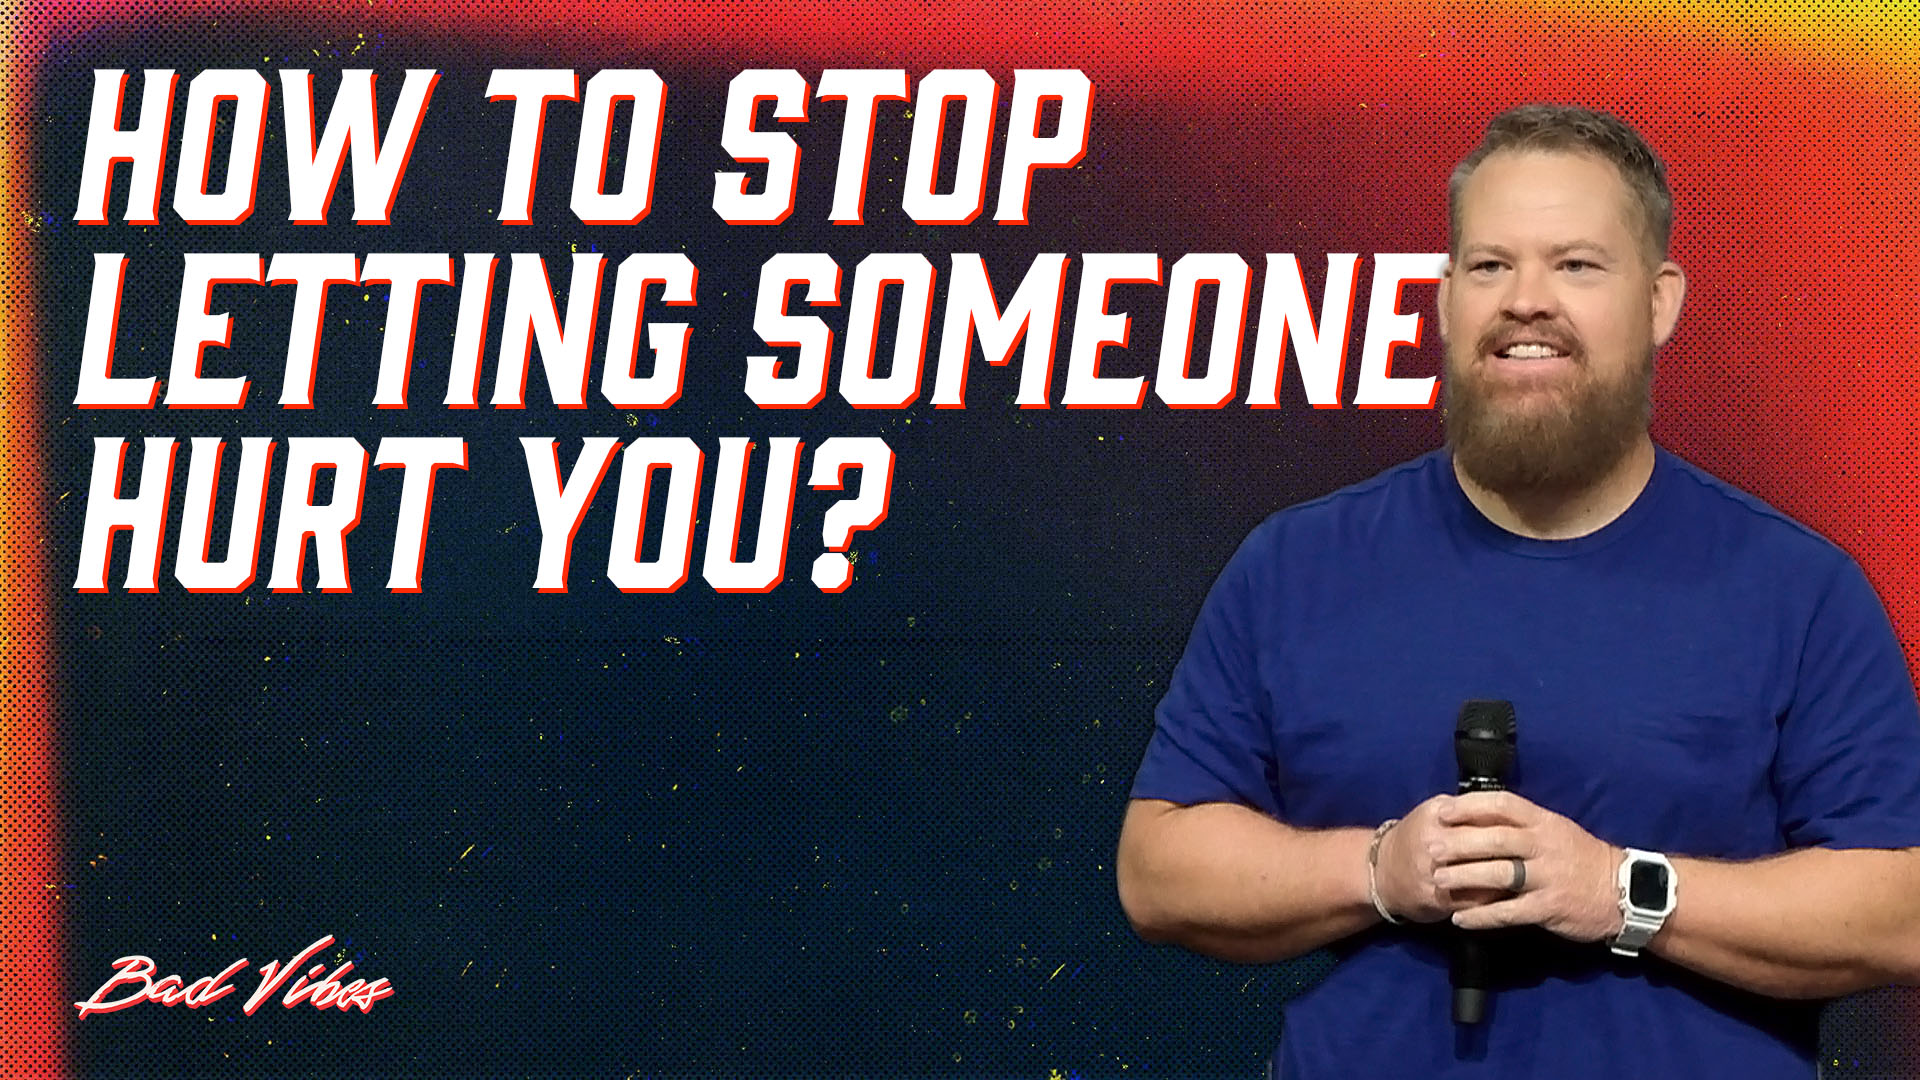 How To Stop Letting Someone Hurt You?